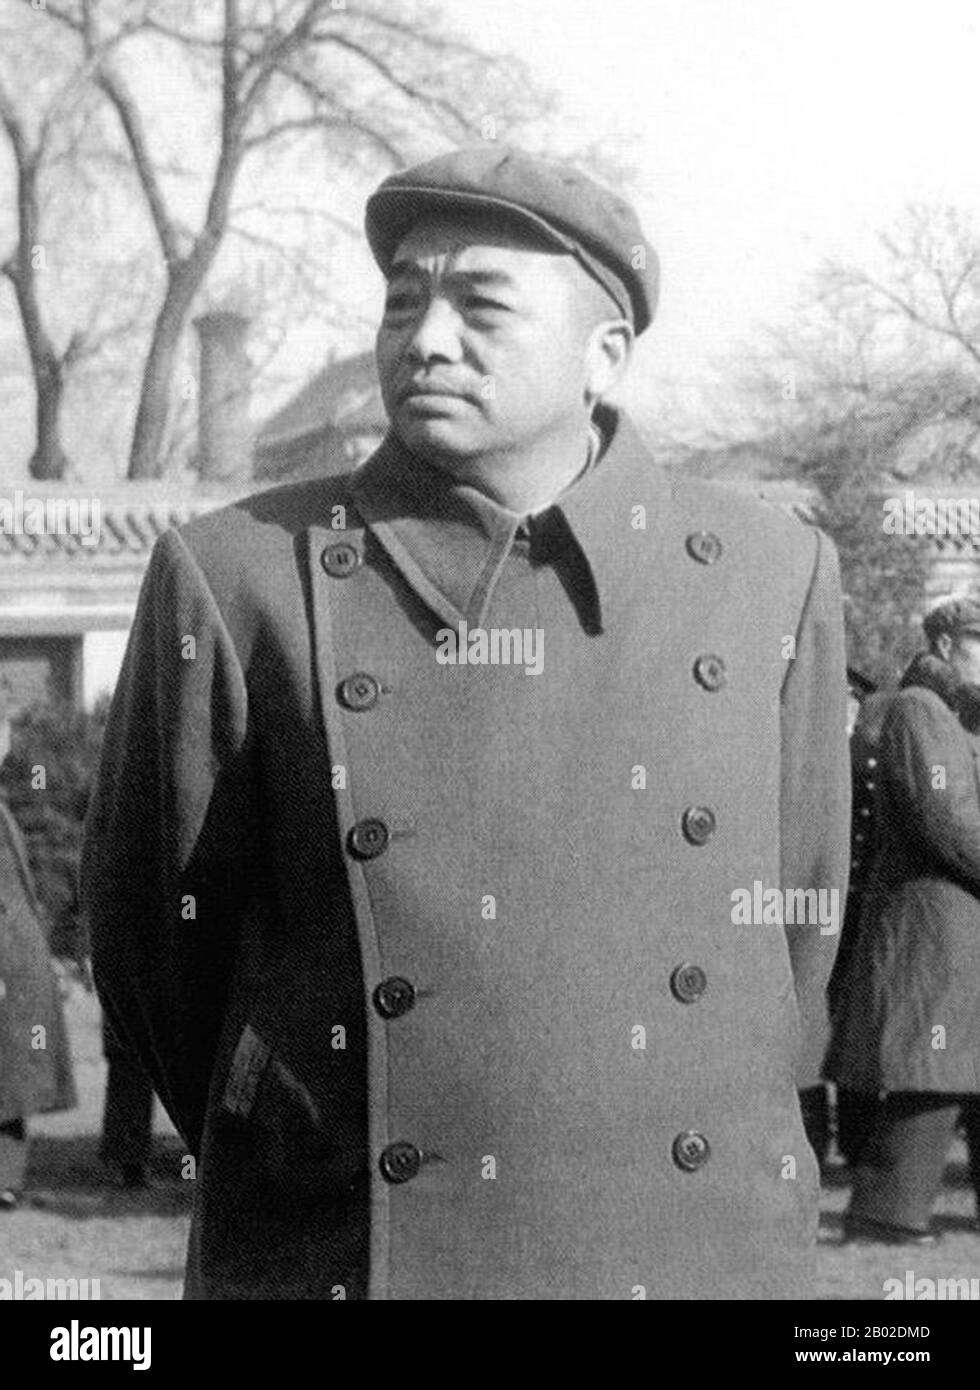 Peng Dehuai (Peng Te-huai; simplified Chinese: 彭德怀; traditional Chinese: 彭德懷; pinyin: Péng Déhuái; Wade–Giles: P'eng2 Te2-huai2) (October 24, 1898 – November 29, 1974) was a prominent Chinese Communist military leader, and served as China's Defense Minister from 1954 to 1959.  Peng was born into a poor peasant family, and received several years of primary education before his family's poverty forced him to suspend his education at the age of ten, and to work for several years as a manual laborer. When he was sixteen, Peng became a professional soldier. Peng participated in the Northern Expedit Stock Photo